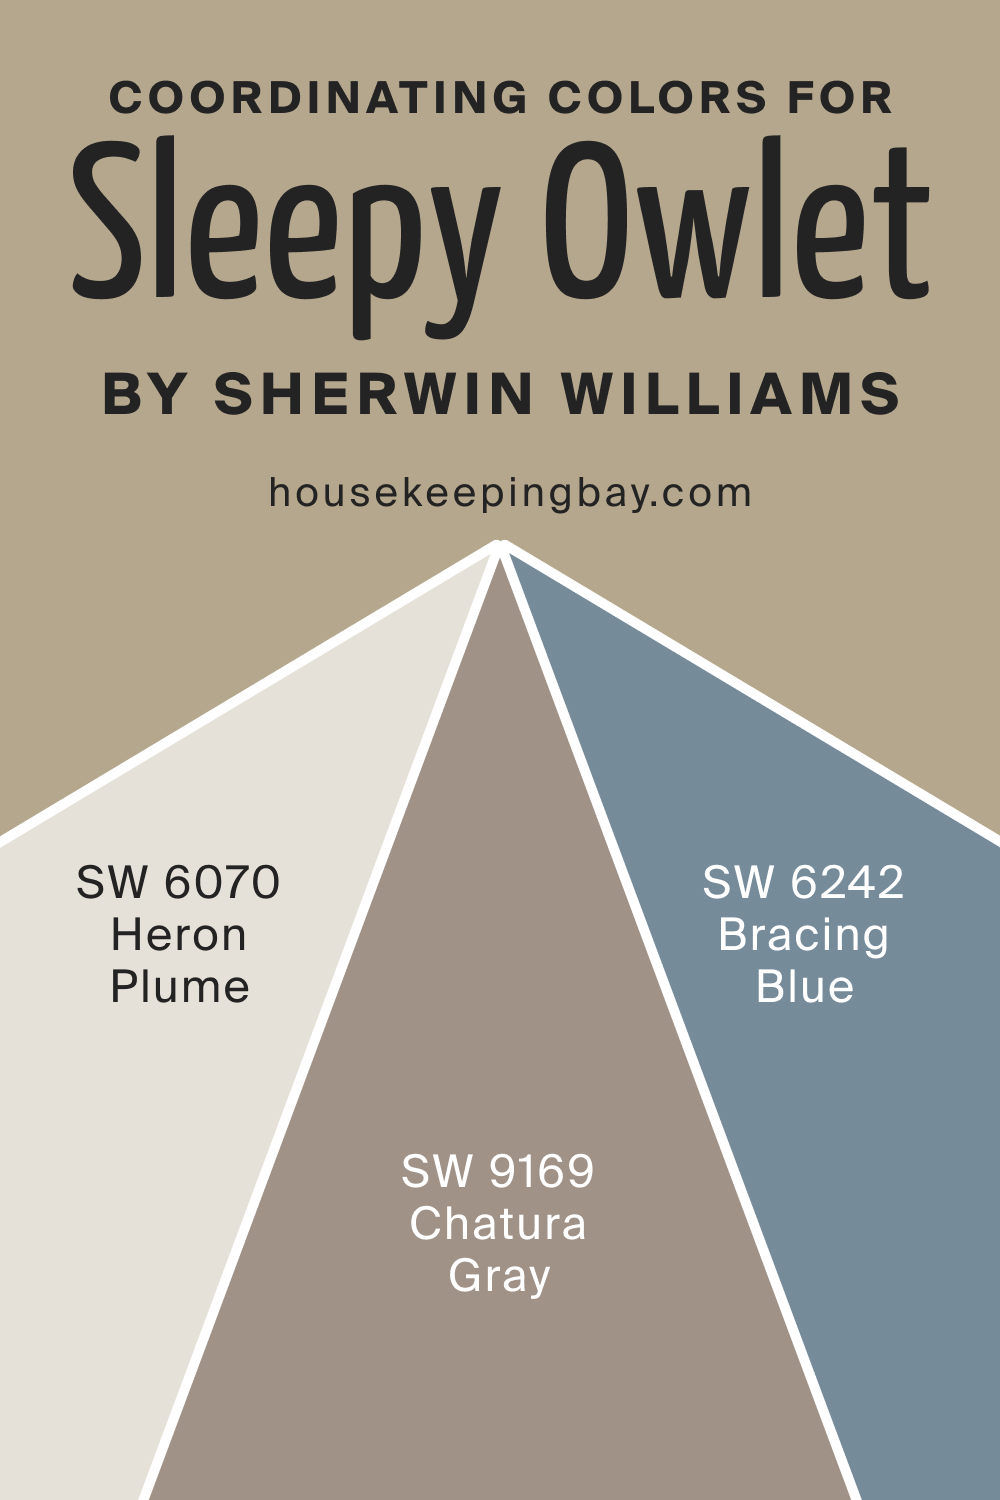 Coordinating Colors for SW 9513 Sleepy Owlet by Sherwin Williams